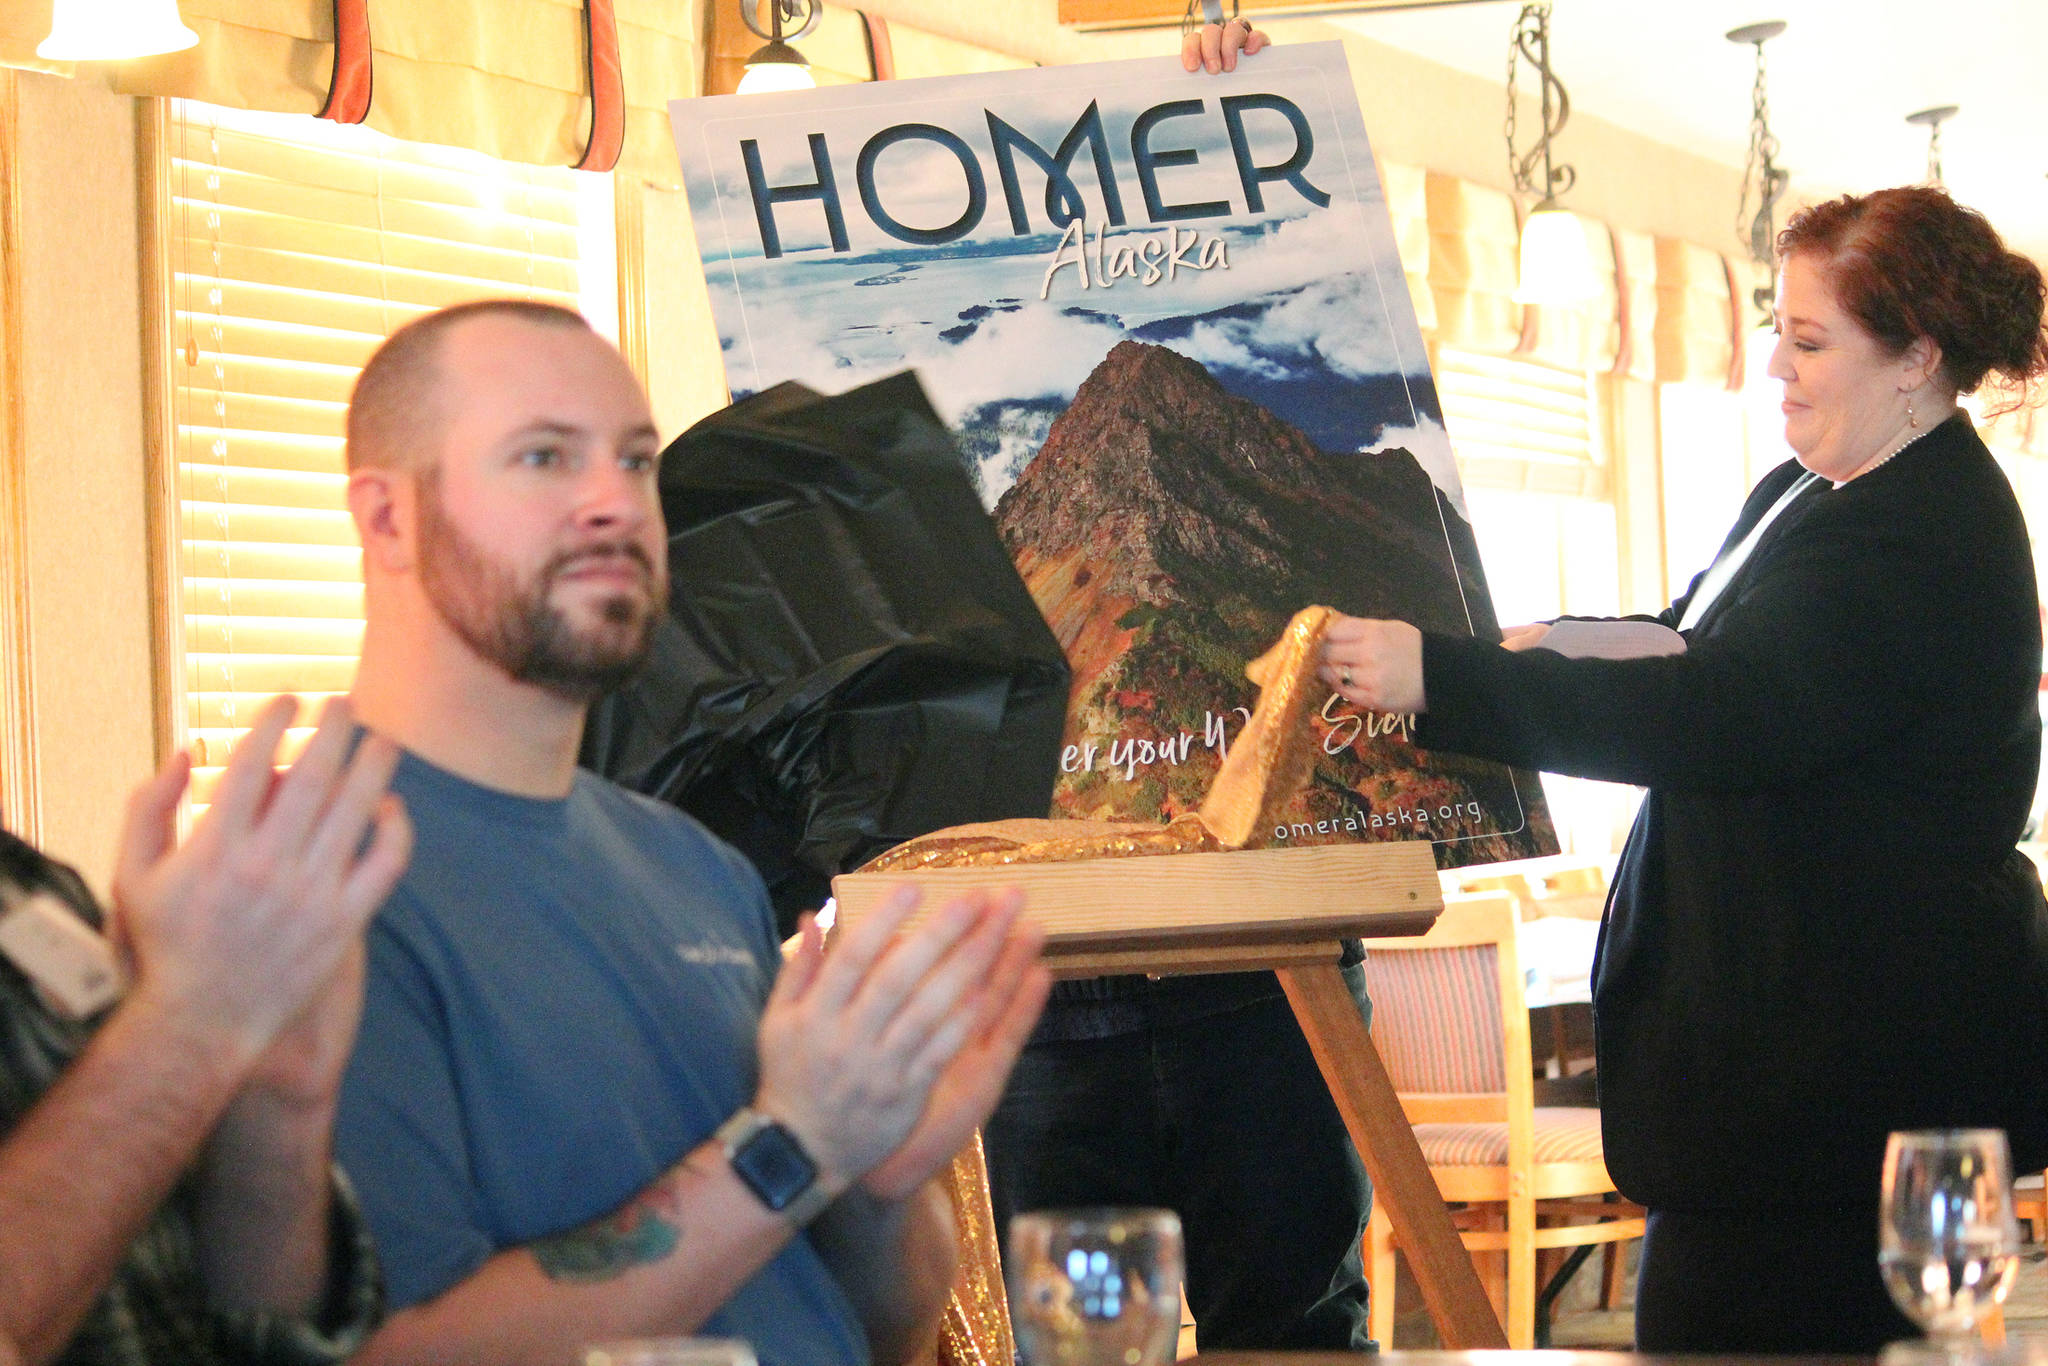 Homer Chamber of Commerce Executive Director Debbie Speakman unveils the winning photo that will grace the cover of the chamber’s next visitor guide at a Tuesday, Jan. 15, 2019 annual chamber meeting at the Best Western in Homer, Alaska. Russel Campbell of Wandering Nomad Photography took the photo. (Photo by Megan Pacer/Homer News)